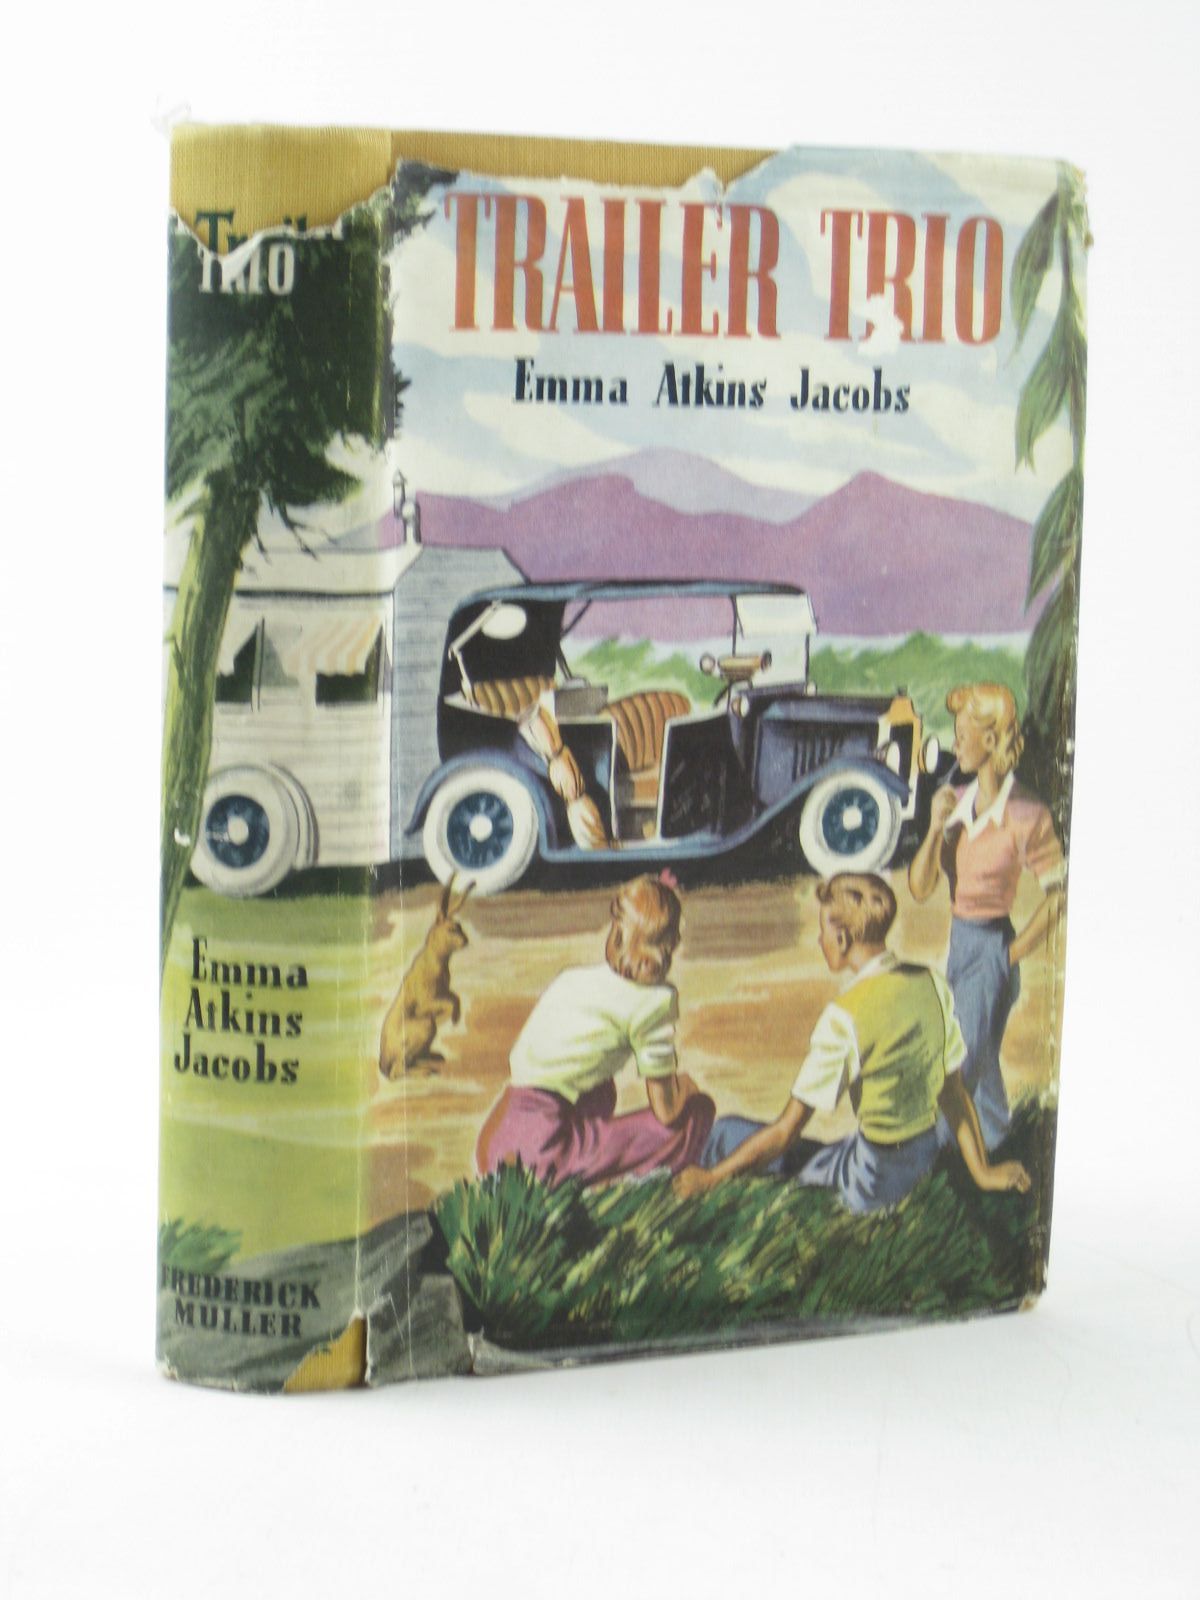 Cover of TRAILER TRIO by Emma Atkins Jacobs